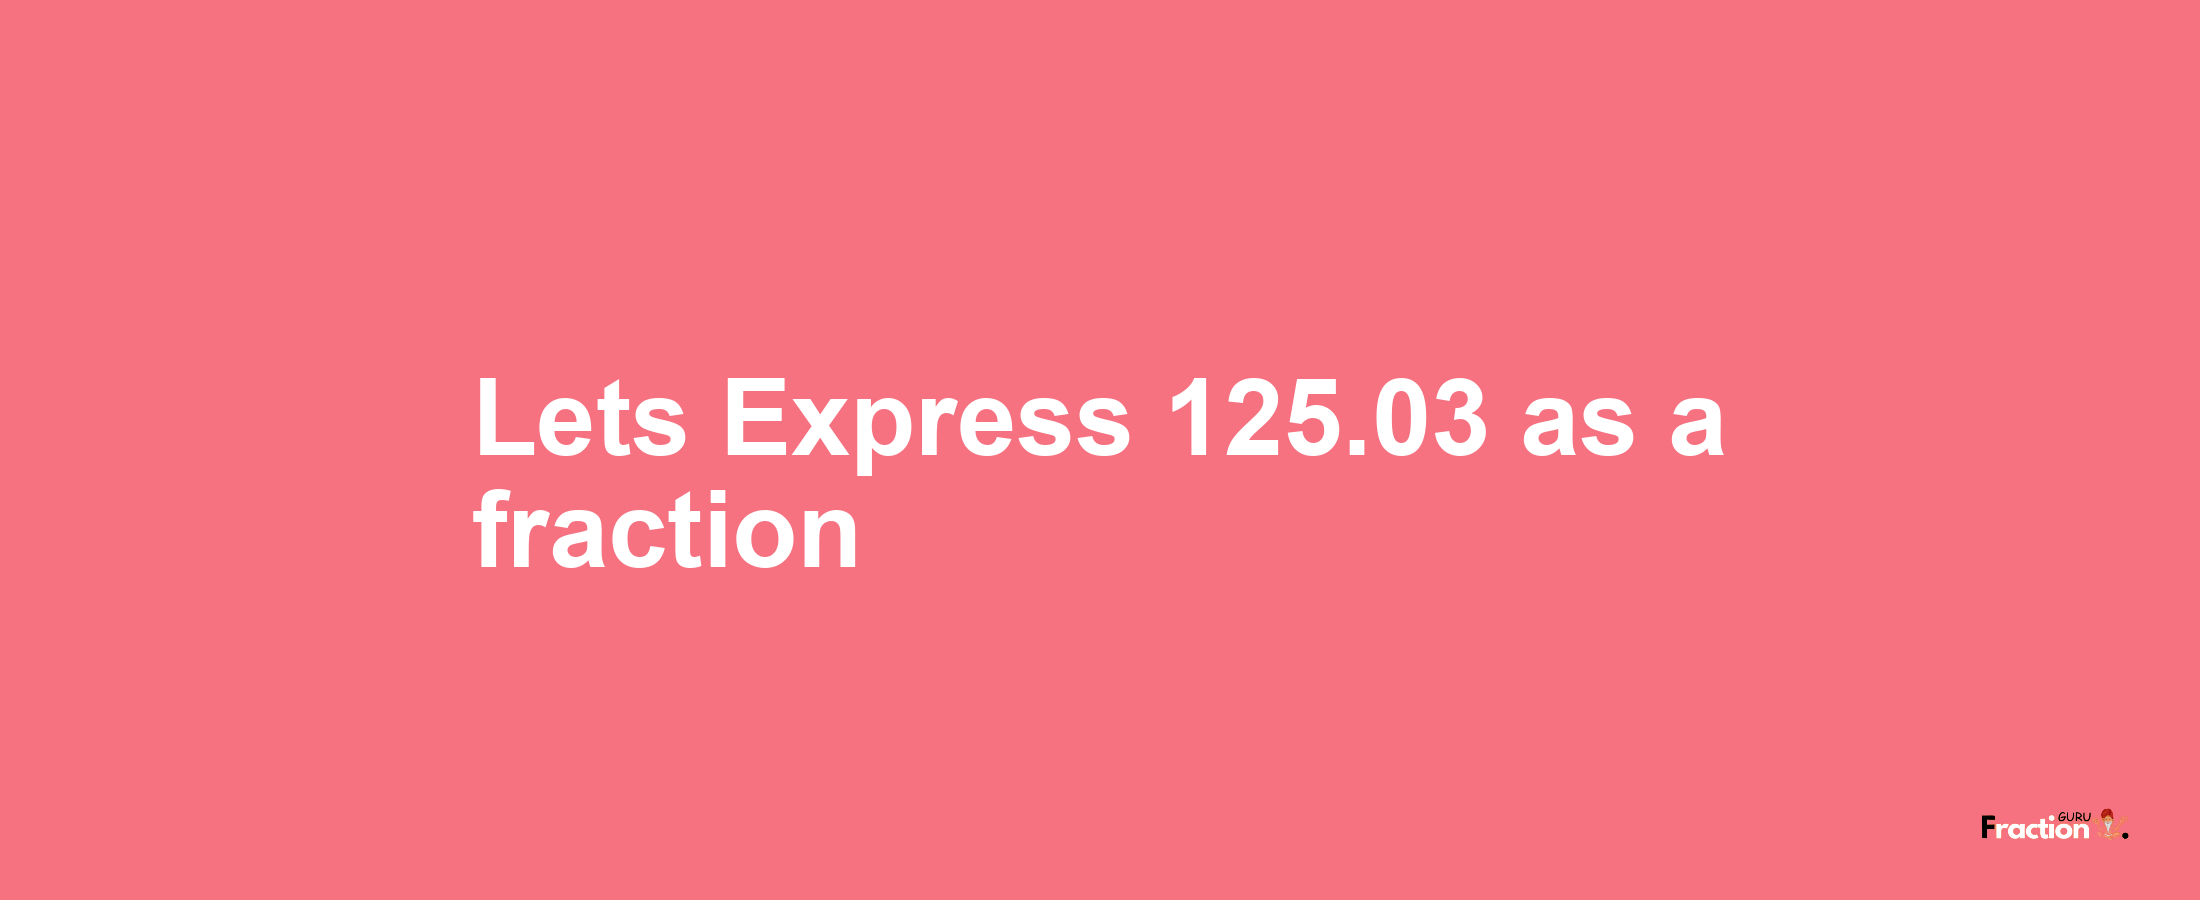 Lets Express 125.03 as afraction